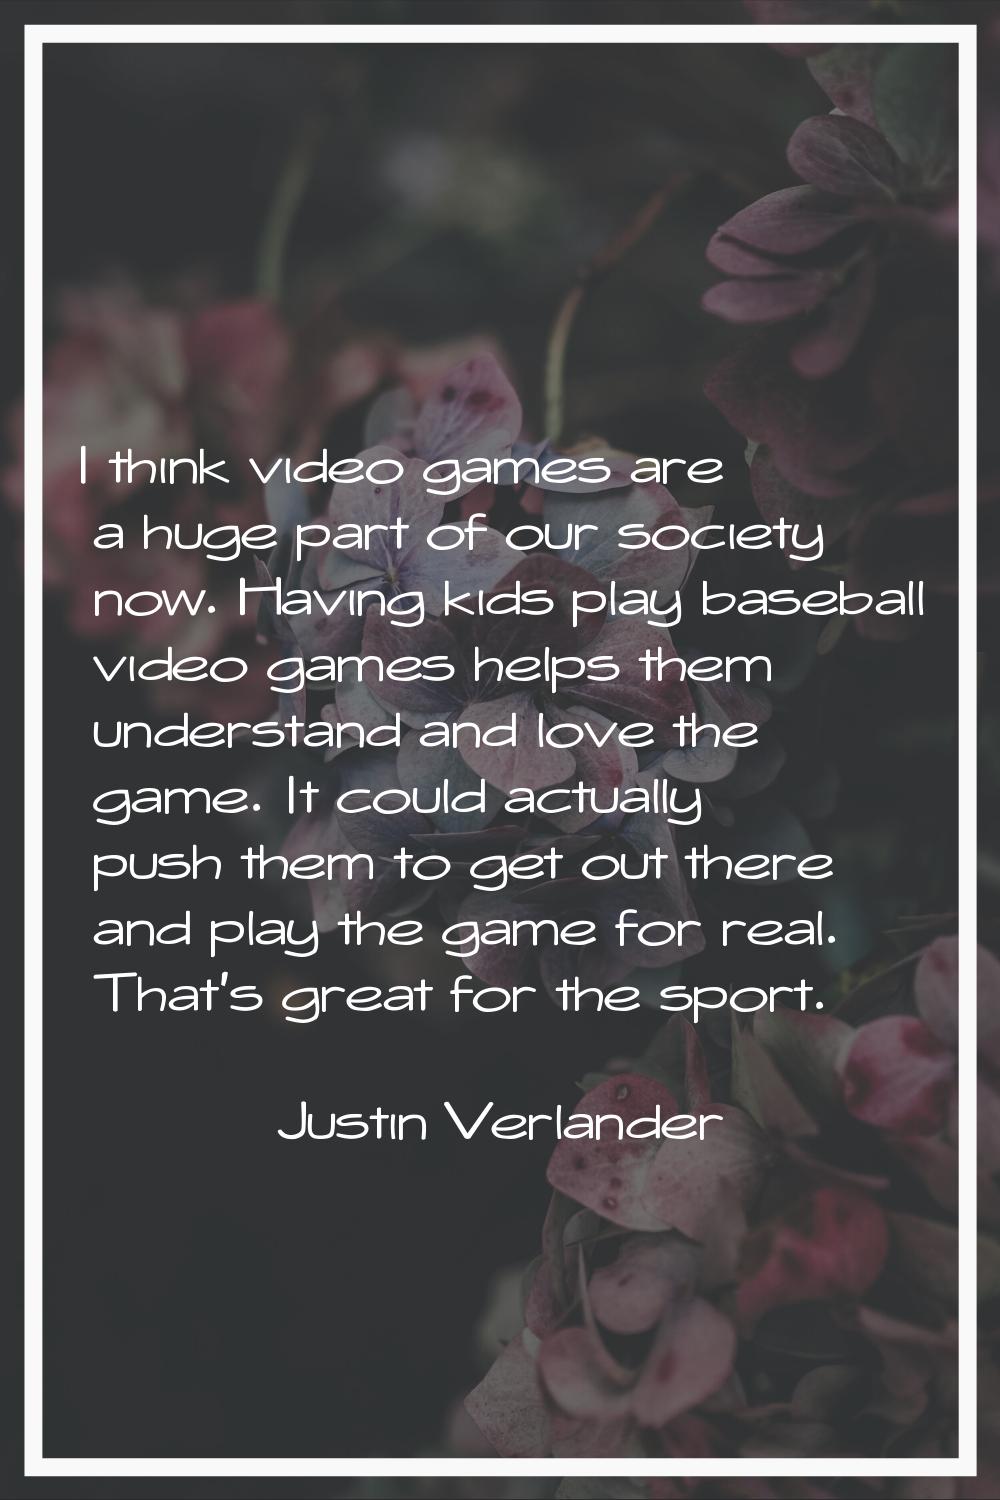 I think video games are a huge part of our society now. Having kids play baseball video games helps